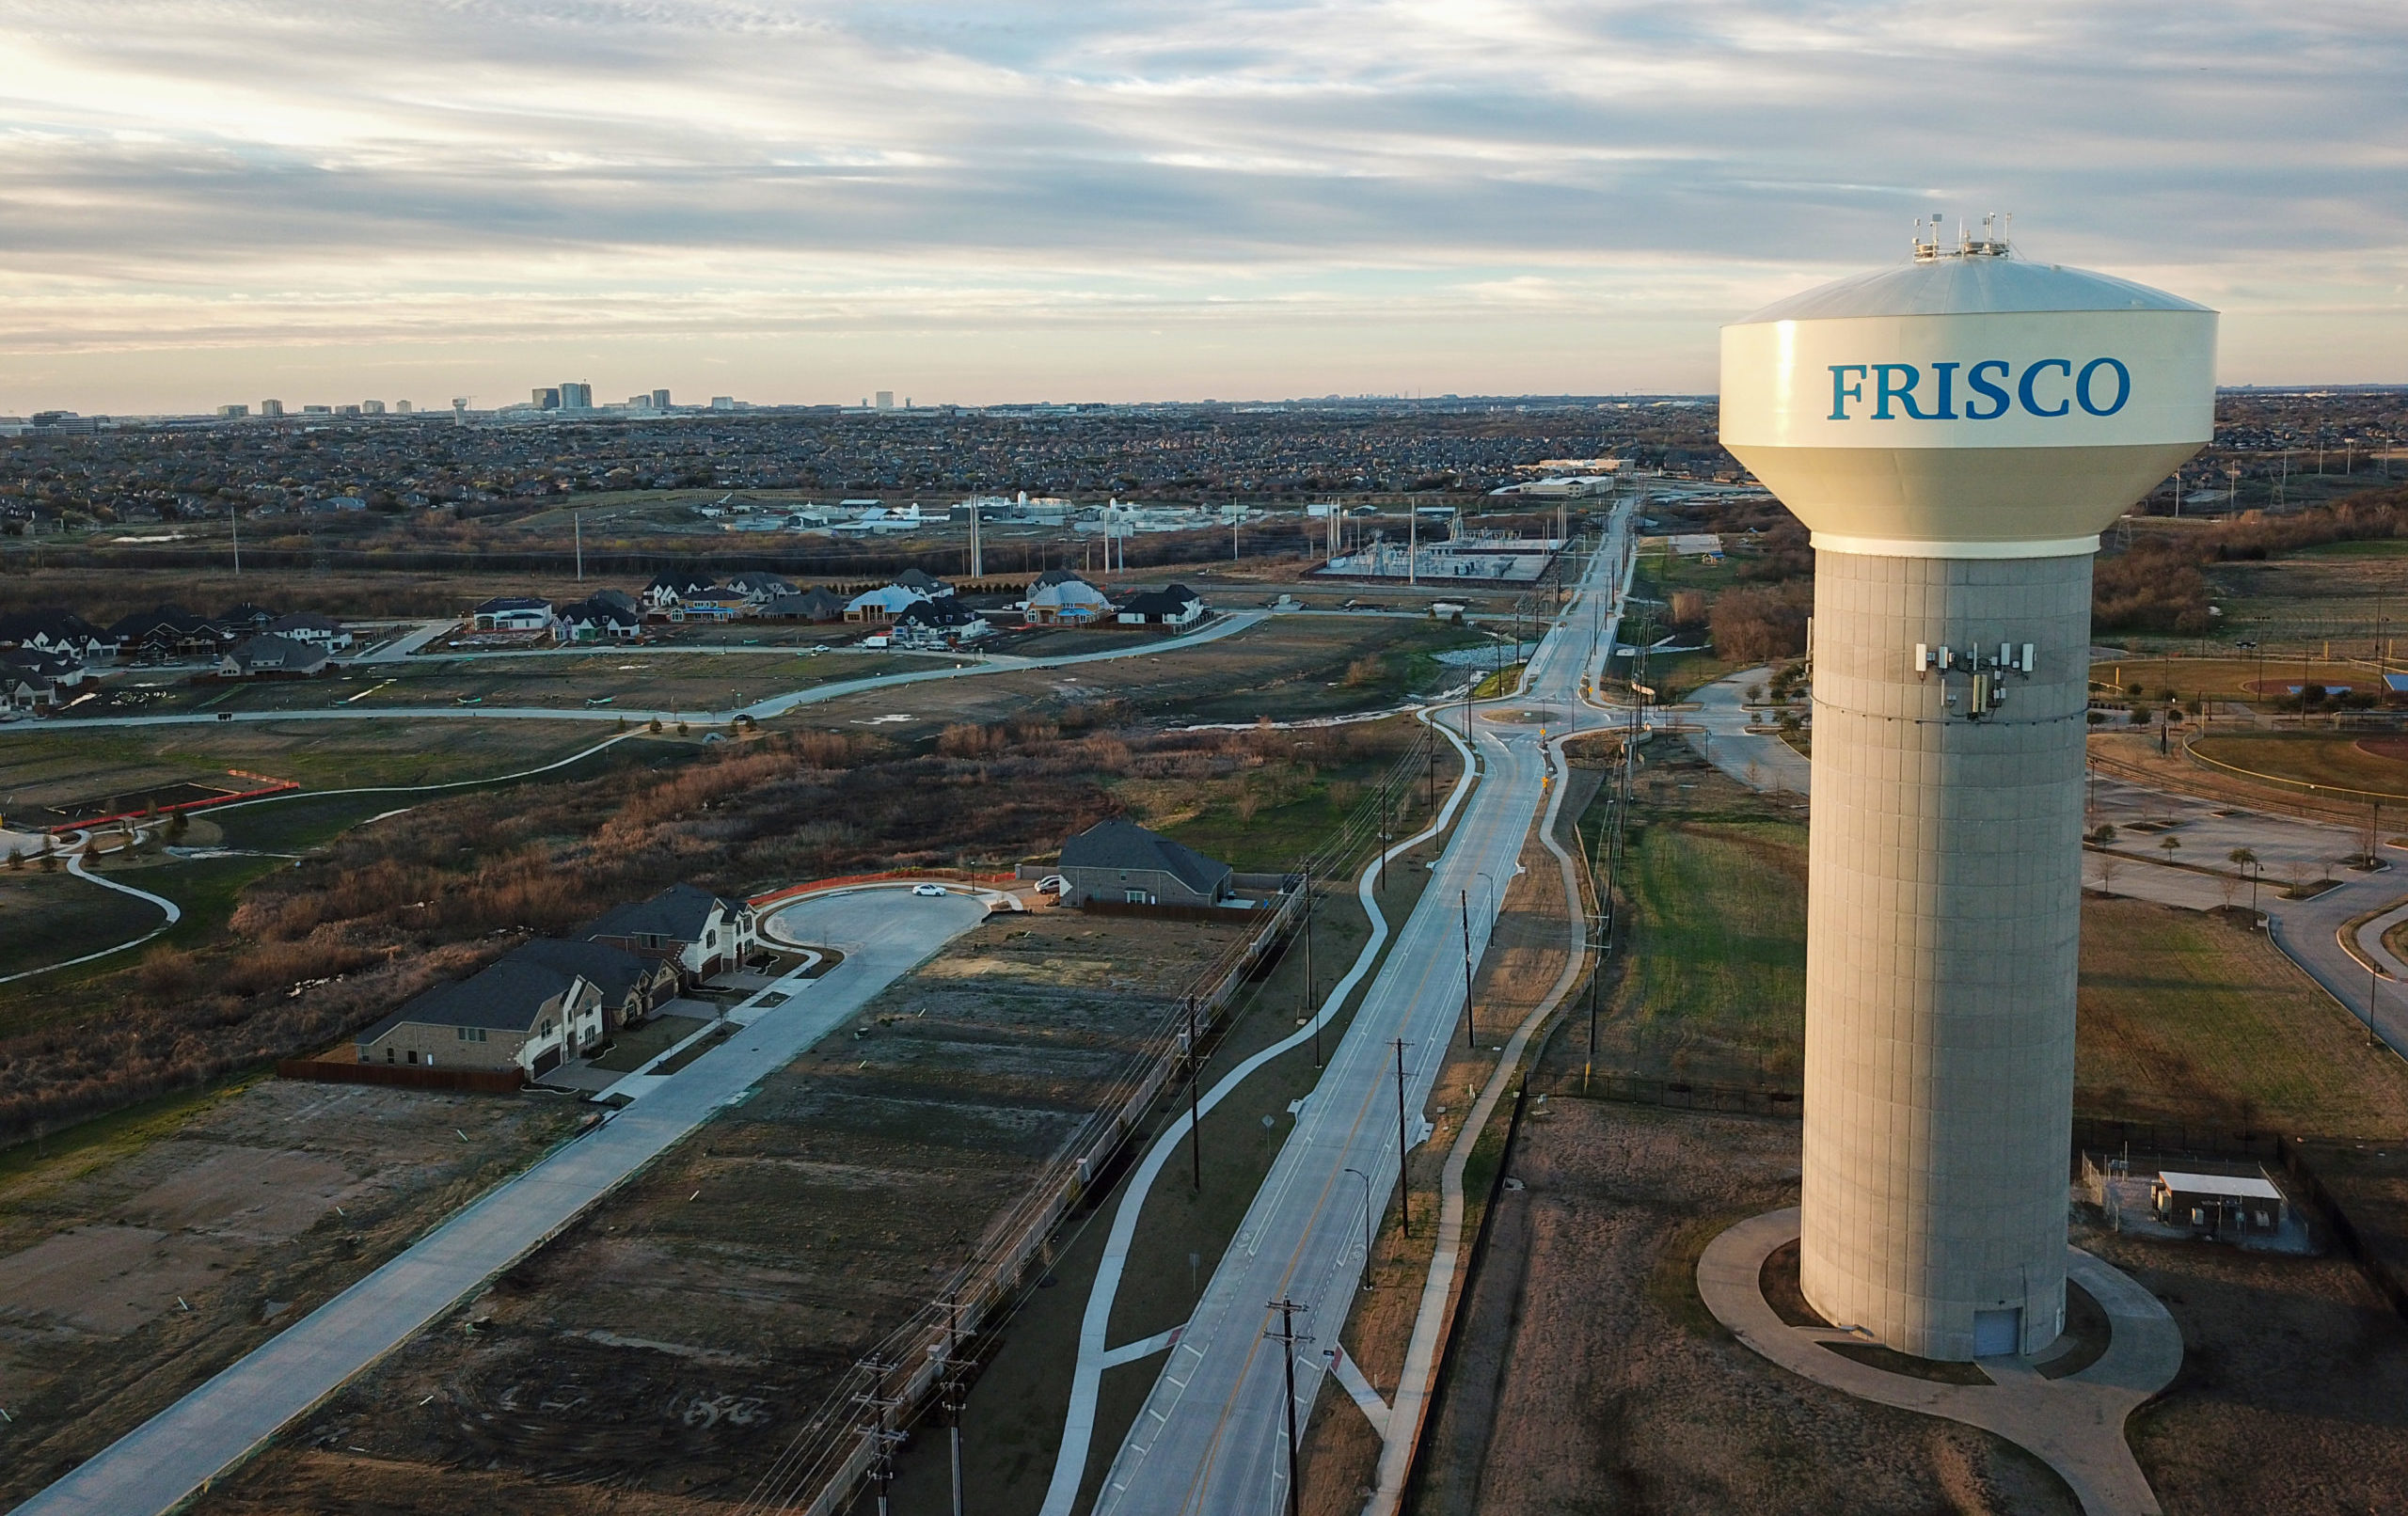 An aerial view of new subdivisions being developed in Frisco, Texas. A Frisco water tower is in the foreground and office towers are on the horizon.